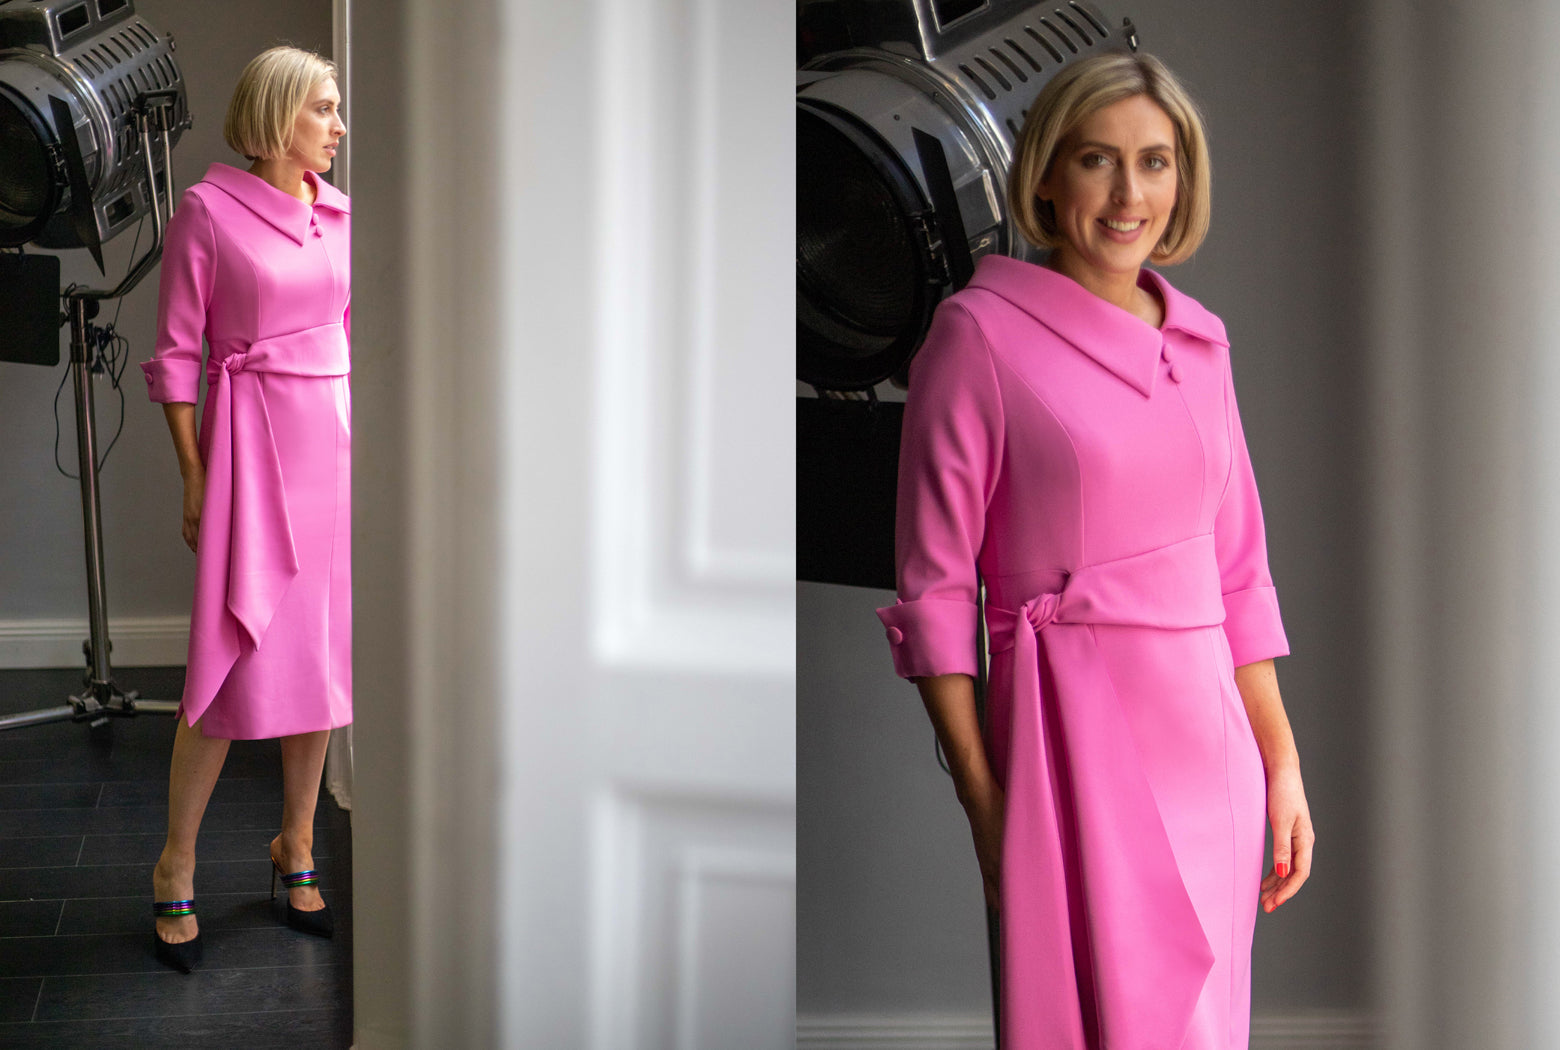 Heidi Higgins wearing the structured pink rena dress with sash sleeves and collar